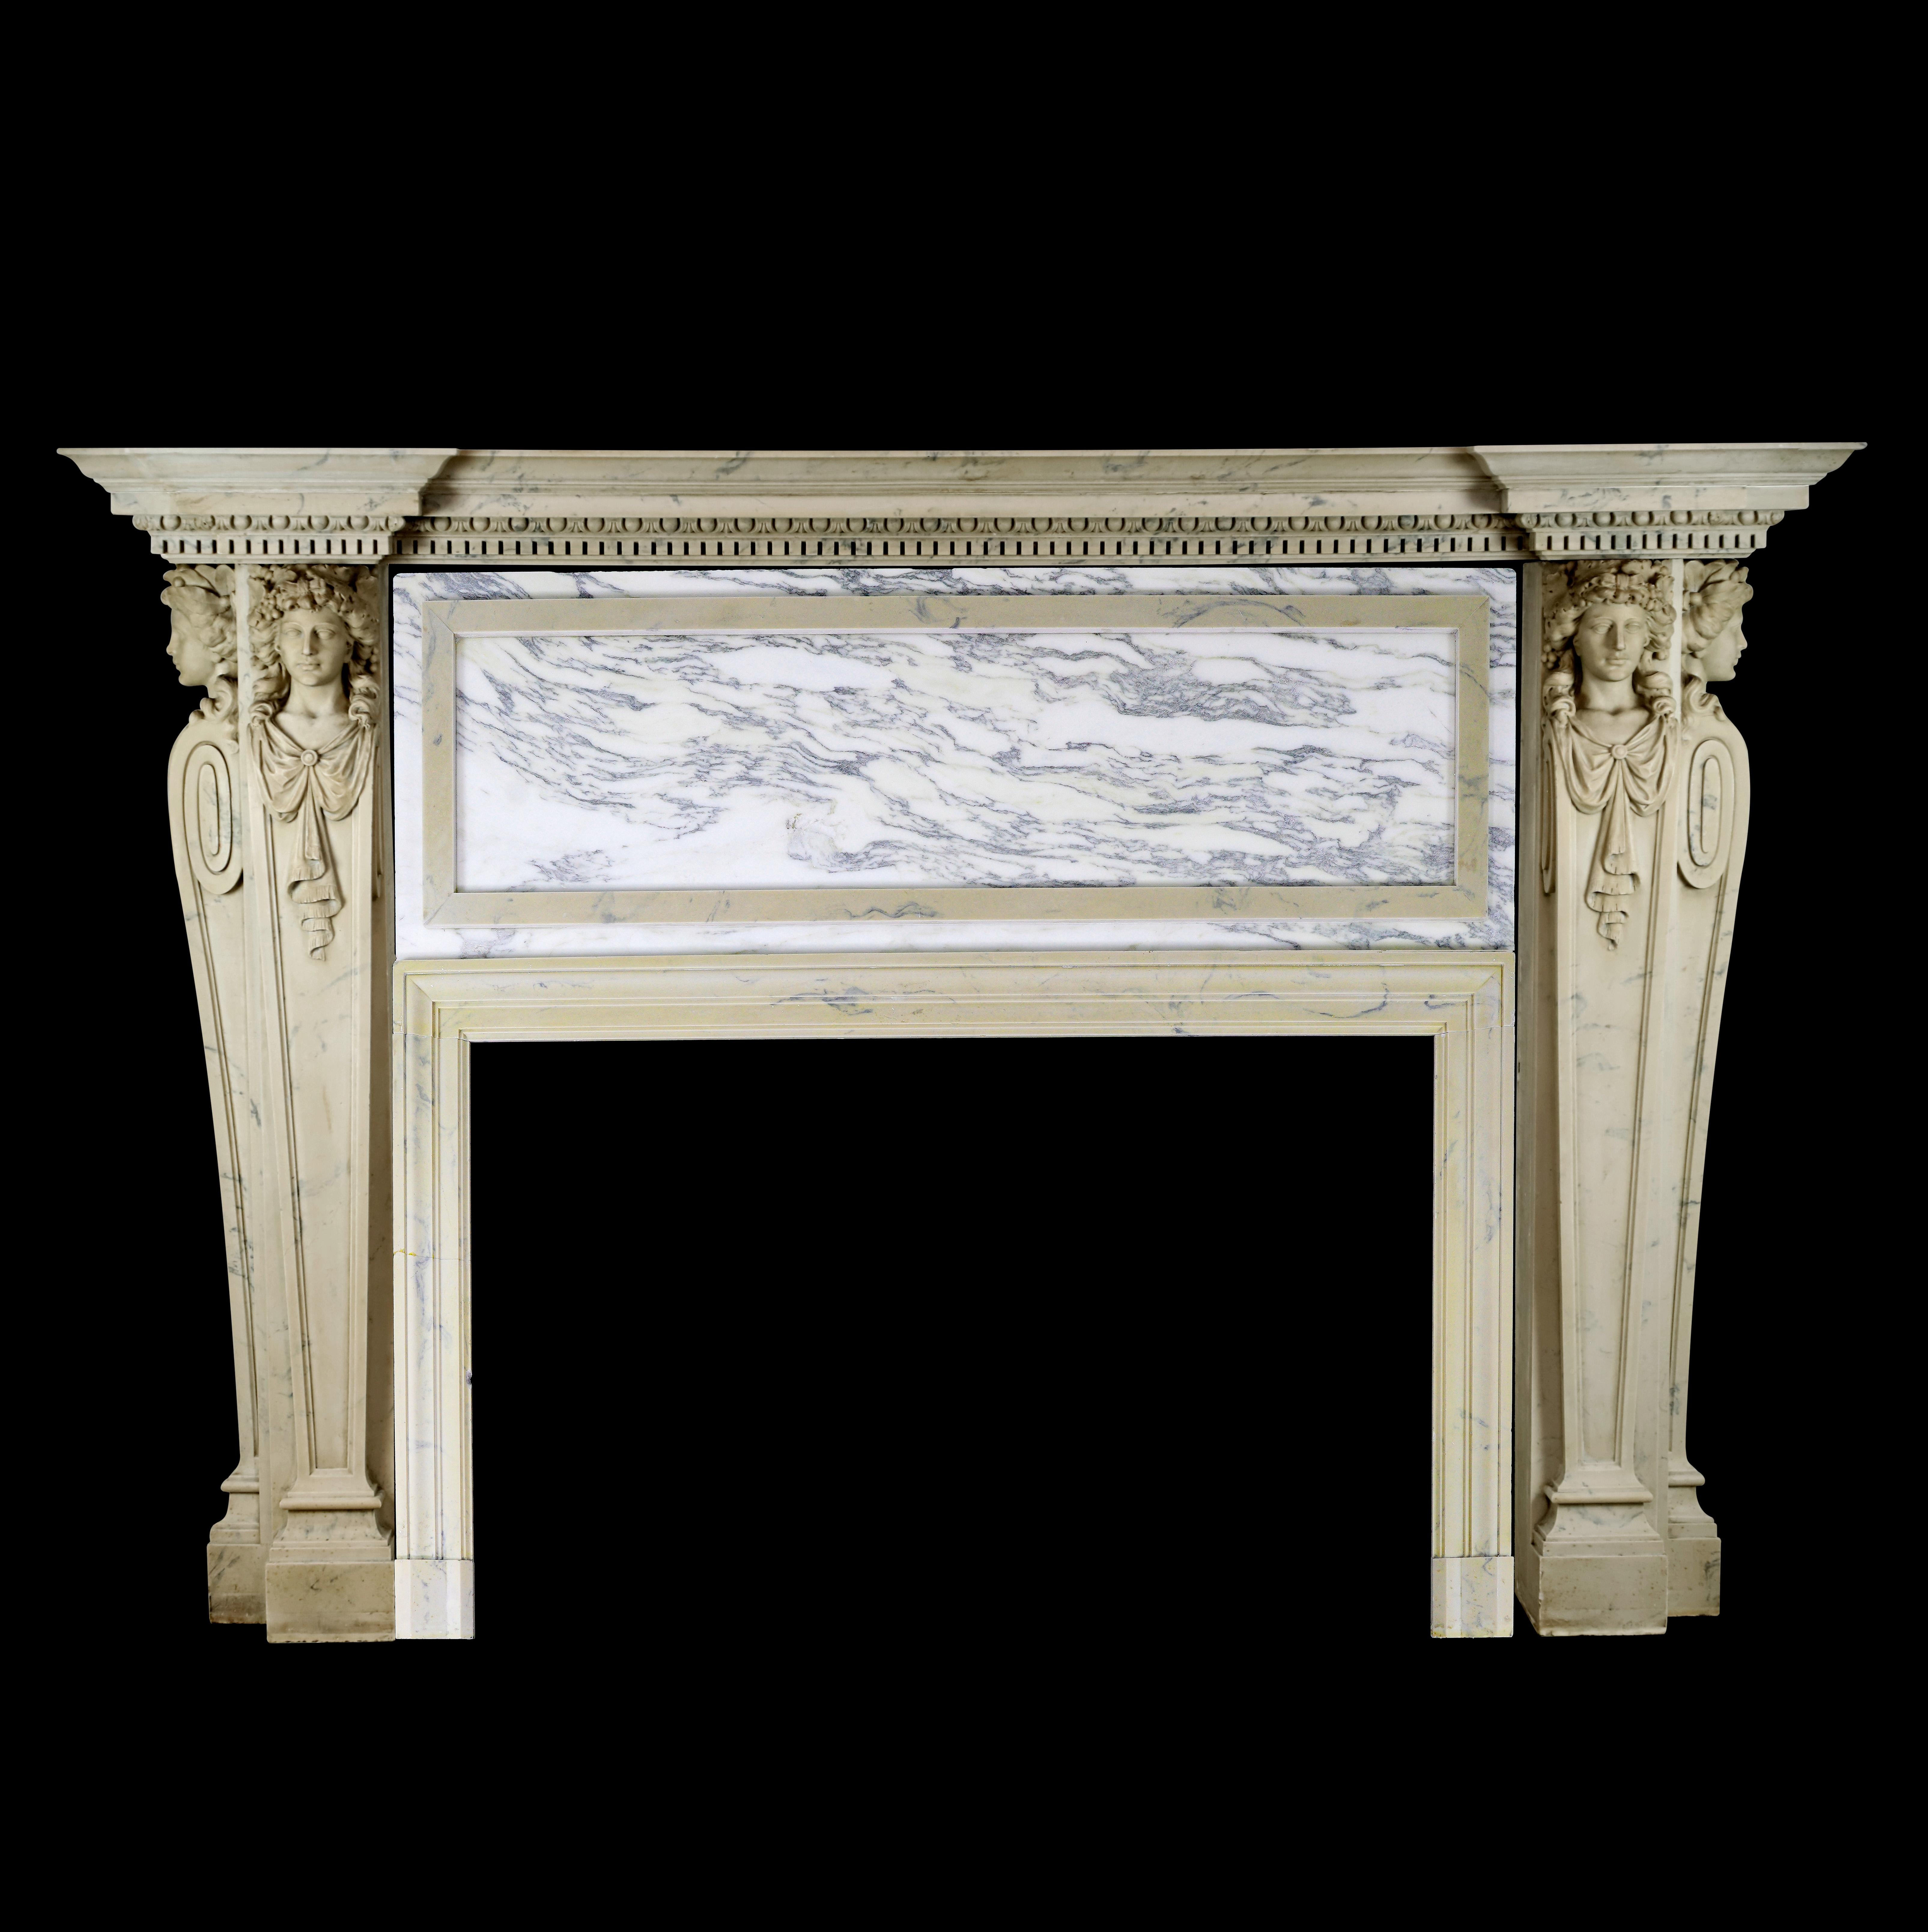 Large and heavy off white fiberglass composite fireplace surround made by Heritage Marble Inc. The shelf is designed with traditional crown molding above, along with classic egg and dart on top of dentil molding details below. Two forward facing